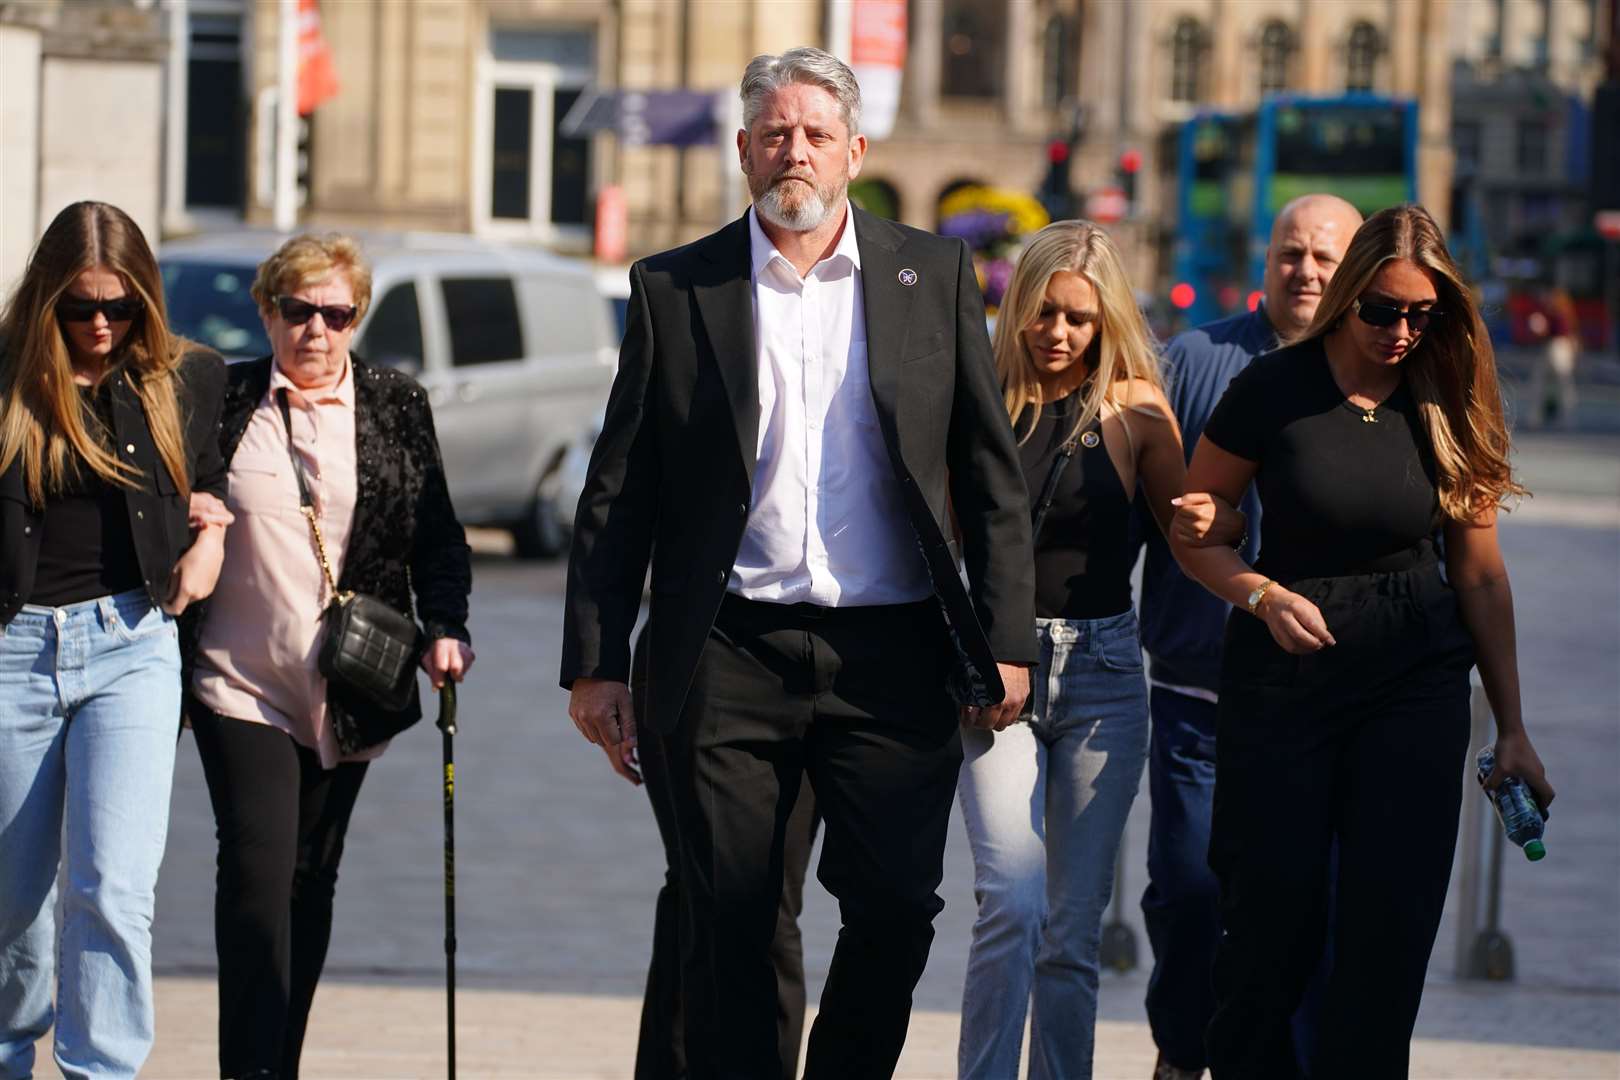 The father of Elle Edwards, Tim Edwards, arrives with family members arrive for a previous hearing at court (Peter Byrne/PA)